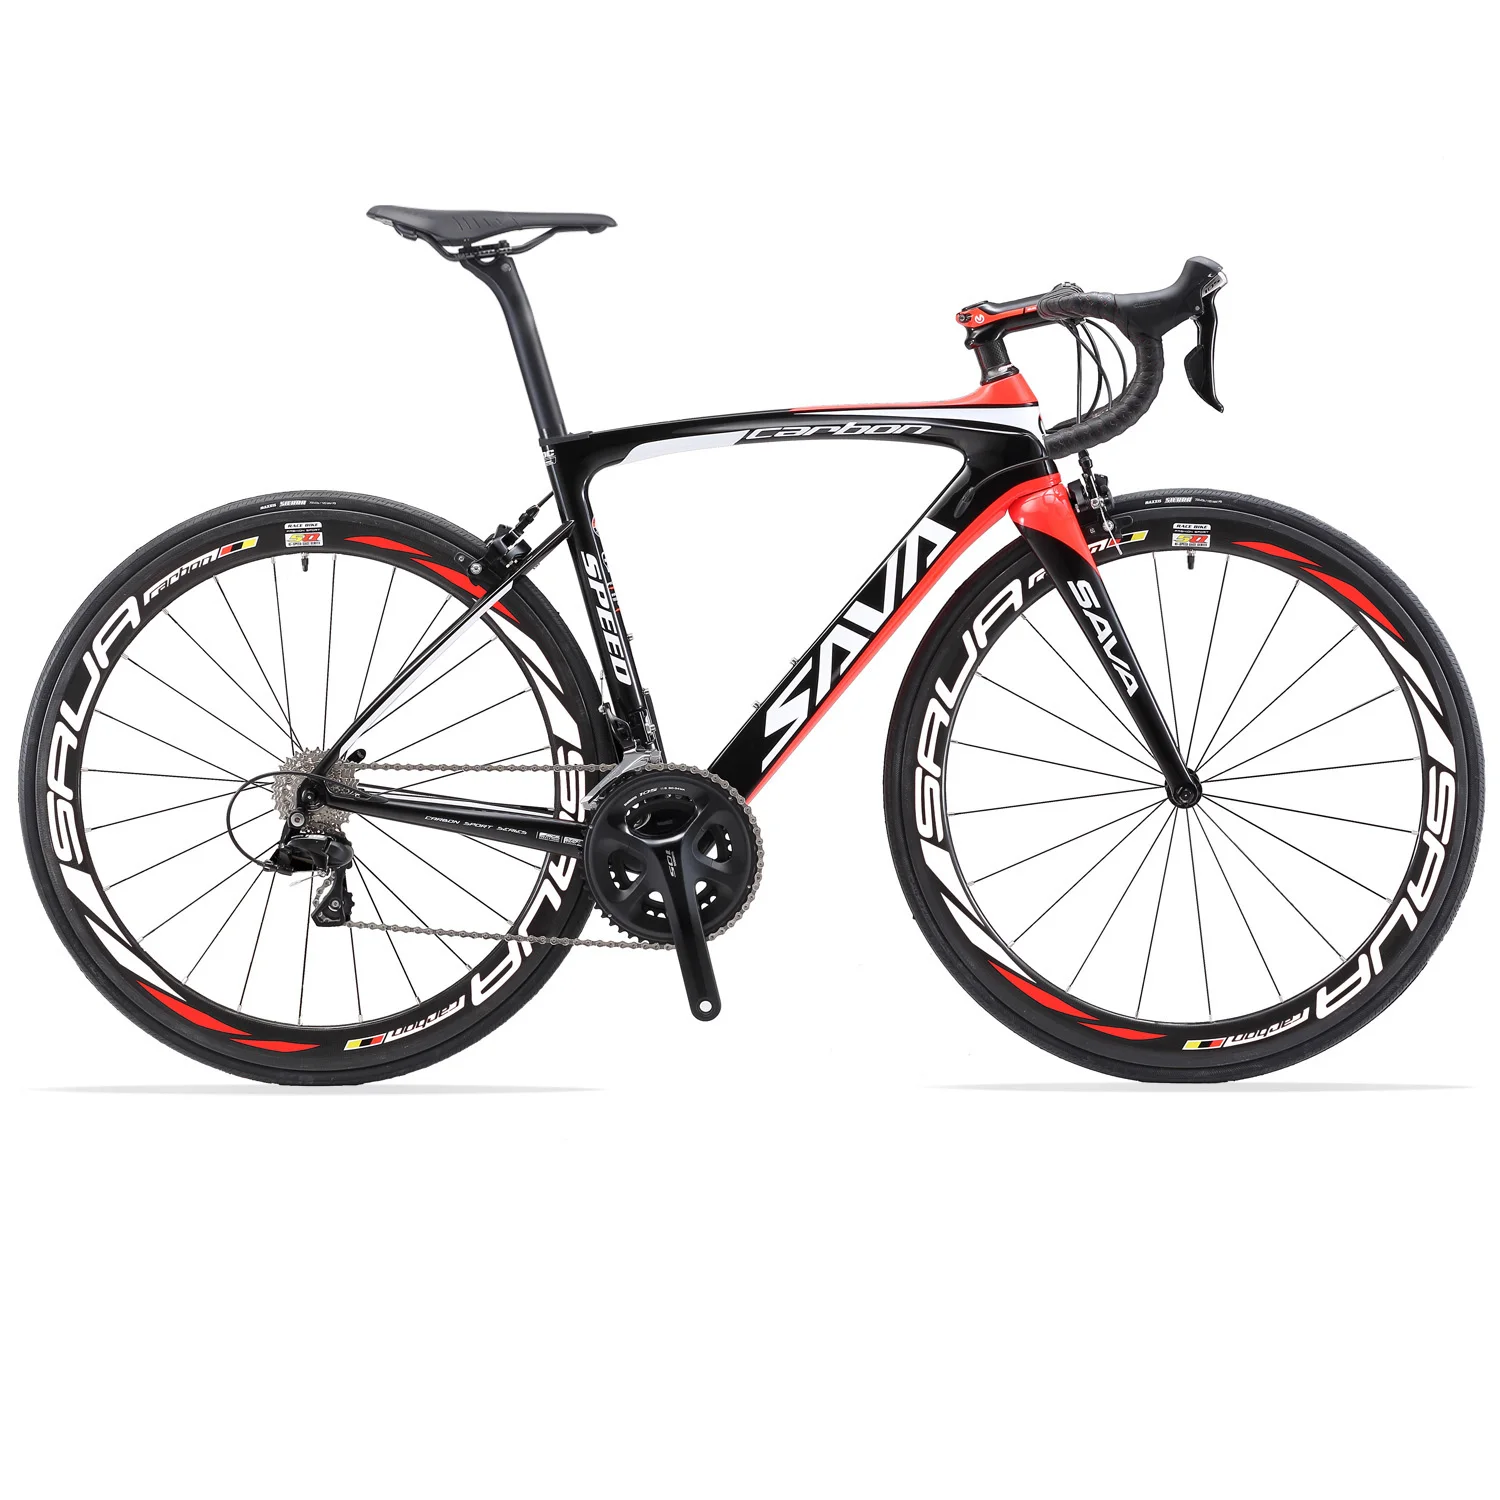 

SAVA wholesale high quality T800 Full Carbon fiber Road Bike with SHIMANO 105 R7000 22 Speeds Road Bicycle, White red/black red/black grey